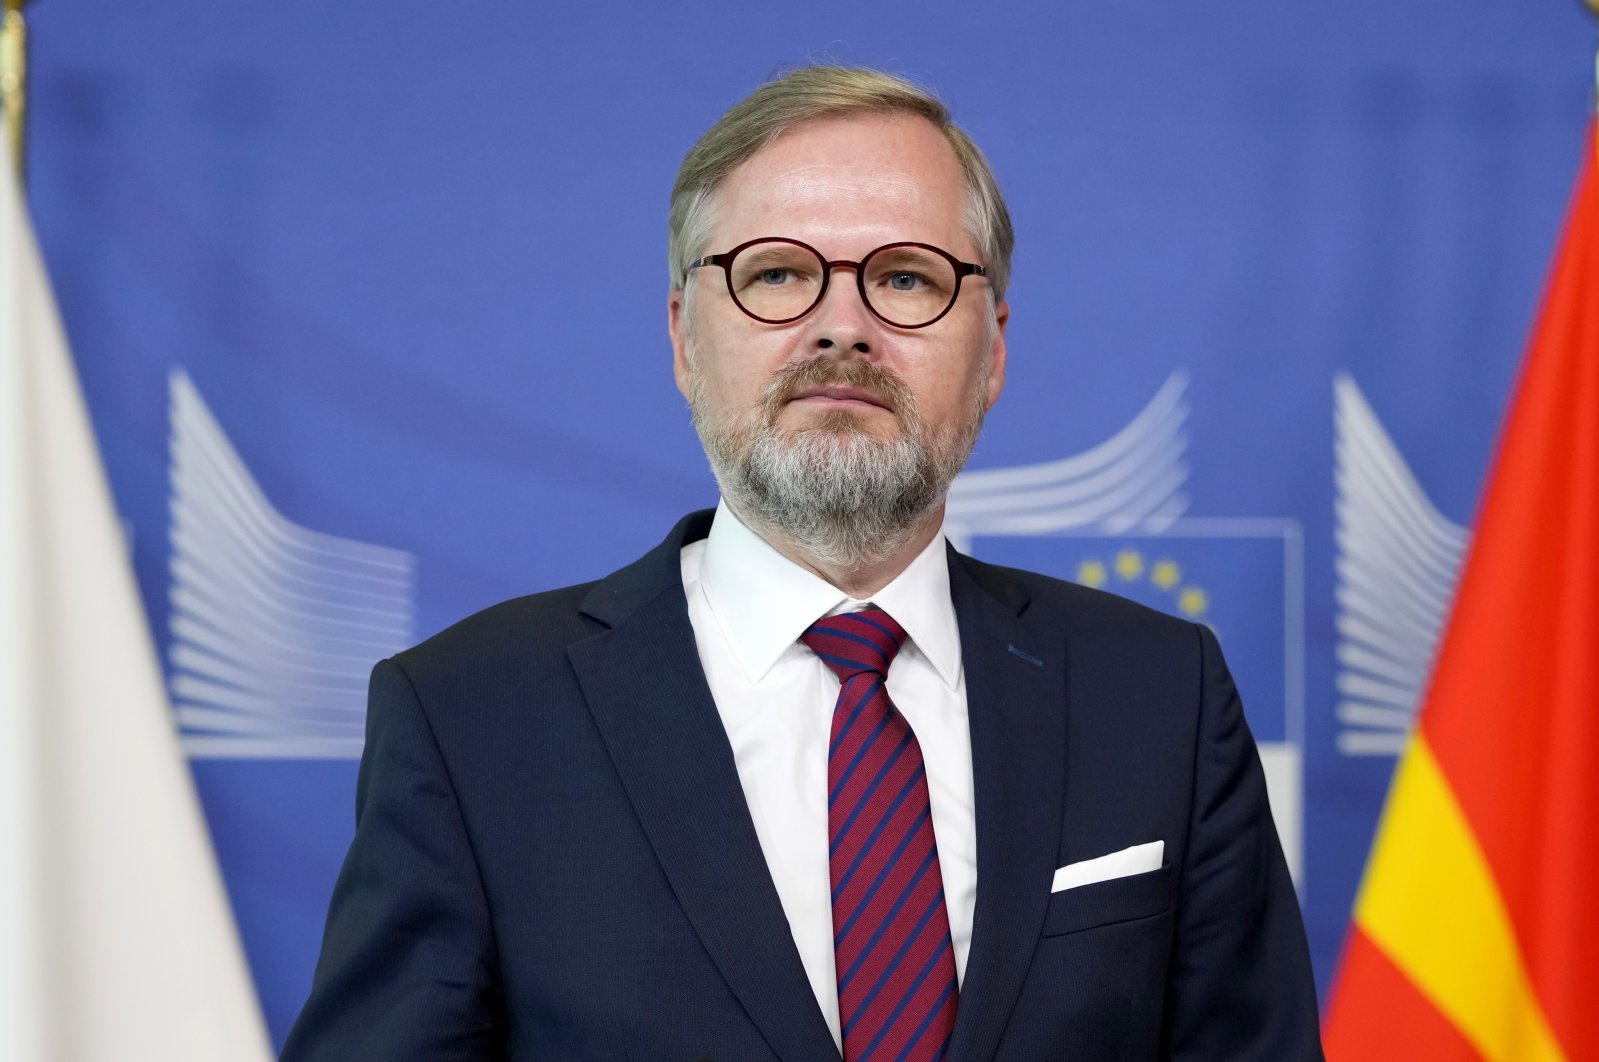 The Czech Republic&#039;s Prime Minister Petr Fiala pauses before speaking as he addresses a media conference at the EU headquarters in Brussels, Belgium, July 19, 2022. (AP Photo)